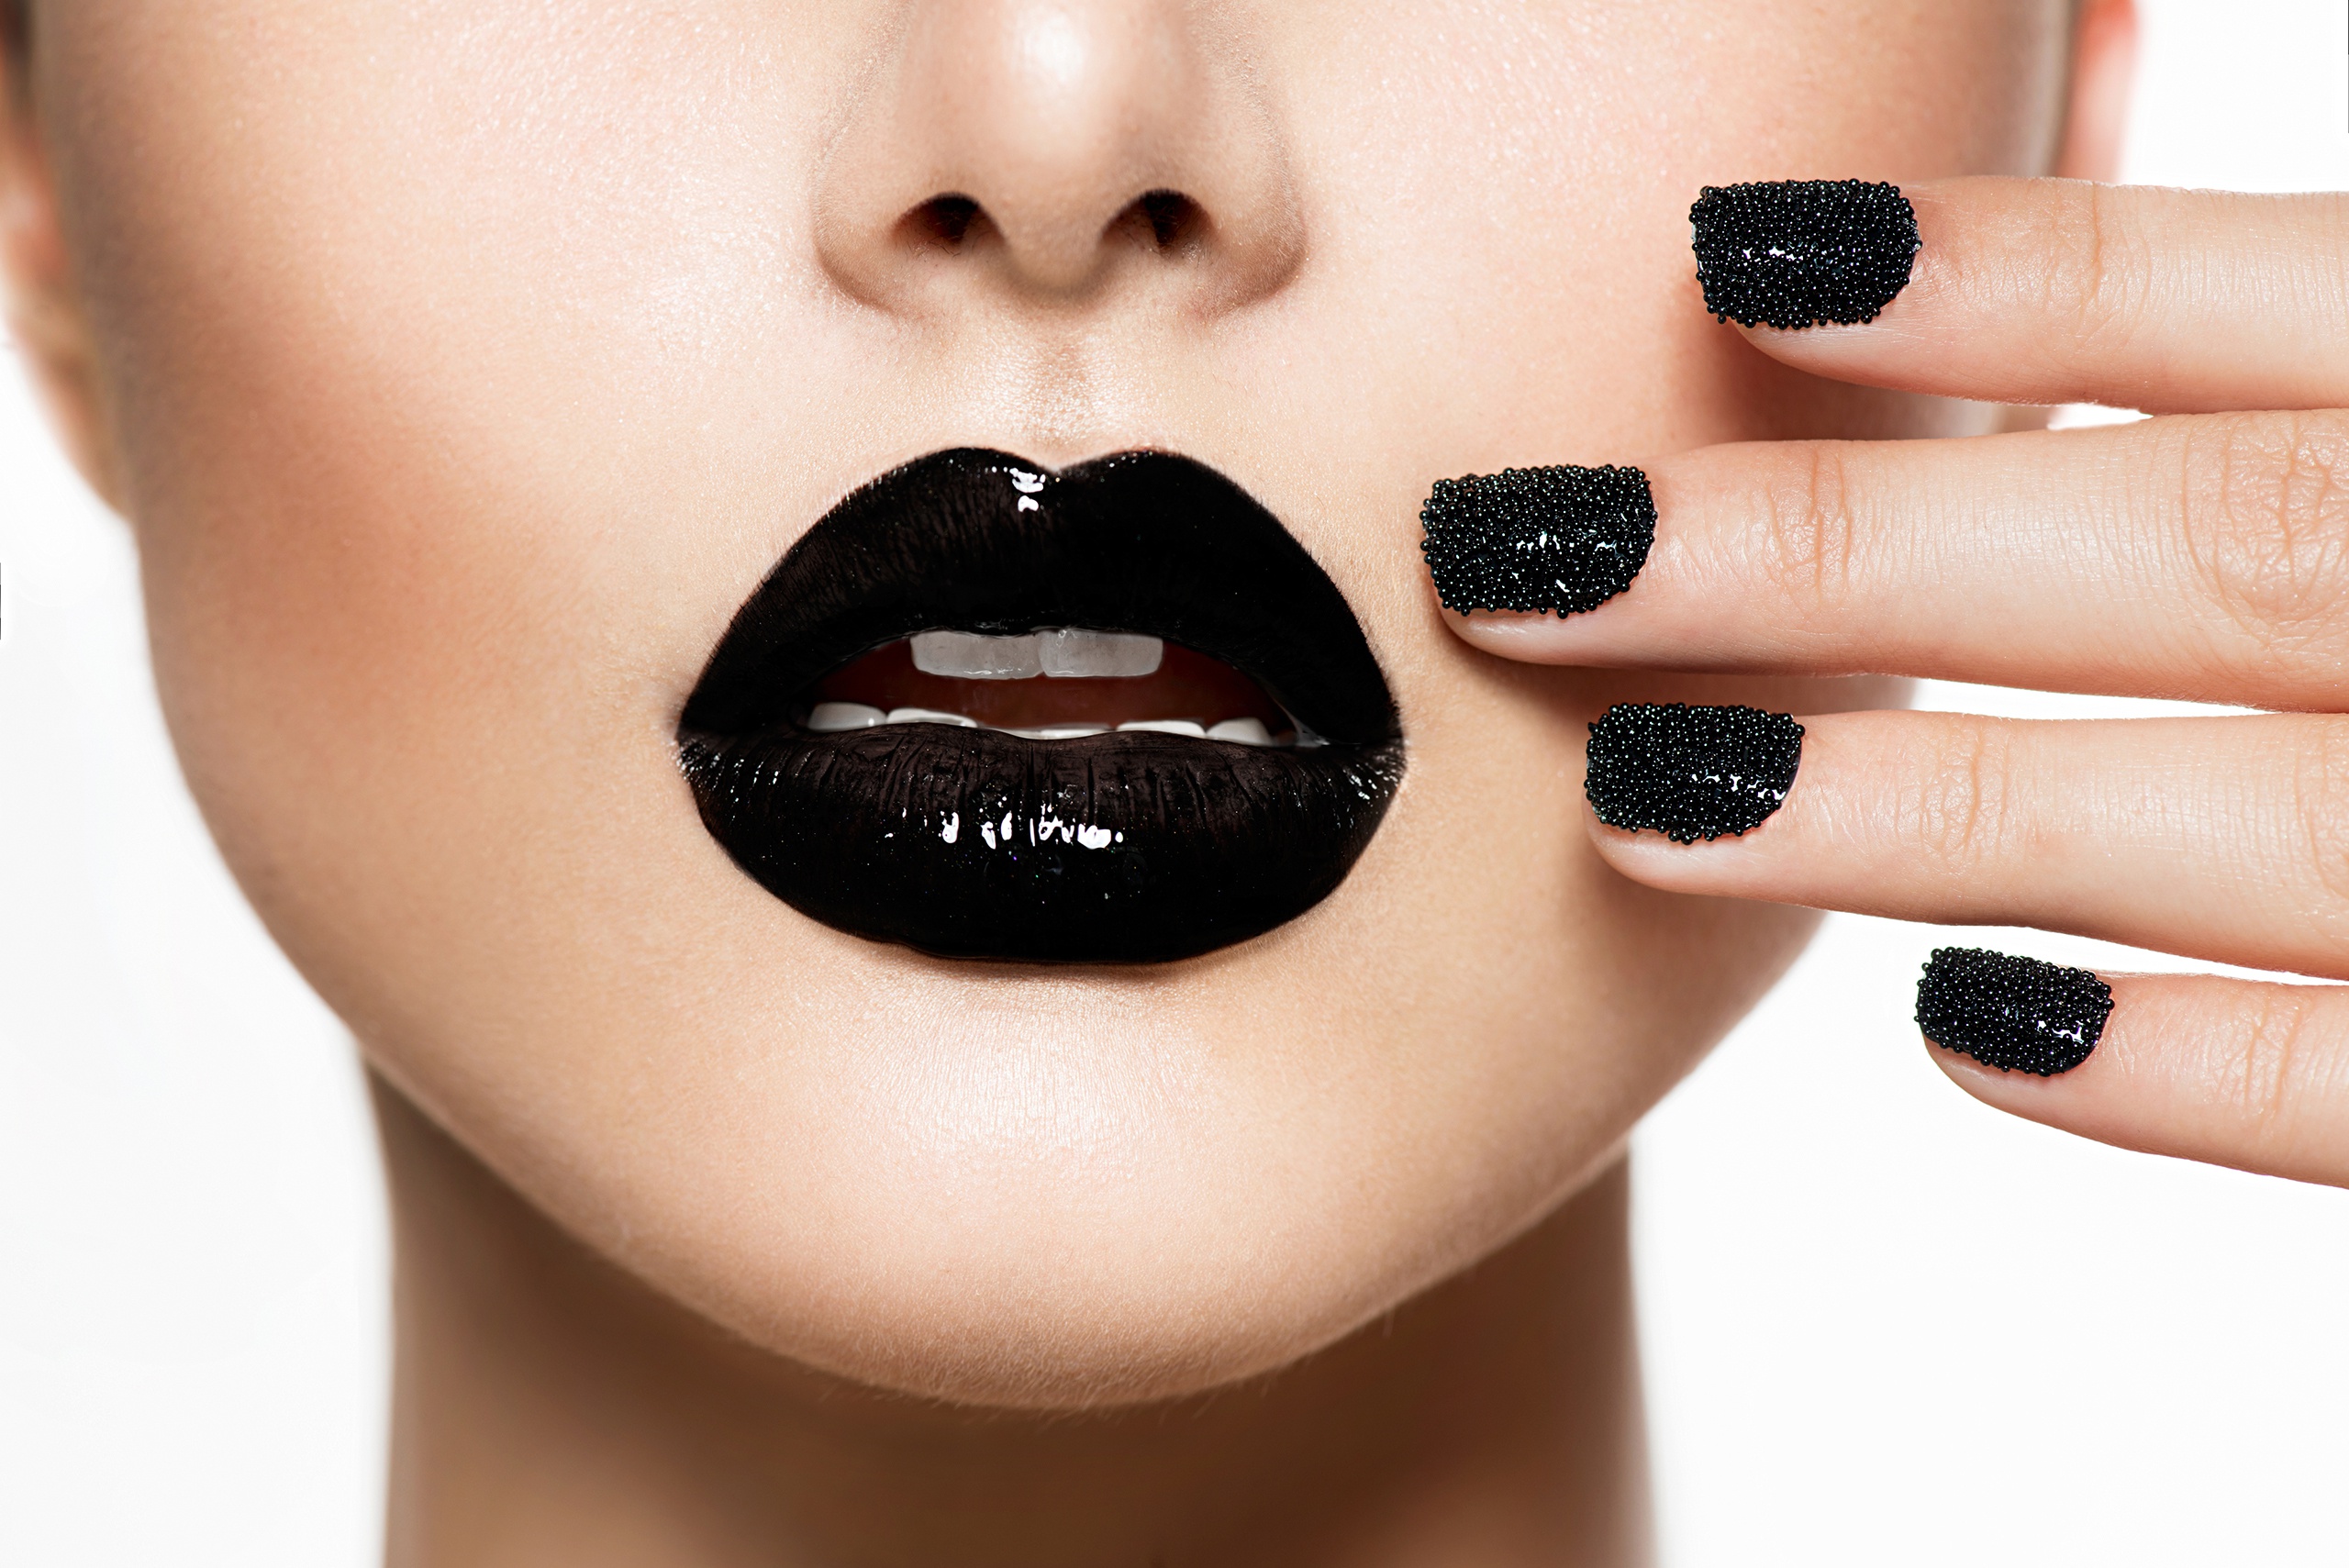 People 2560x1709 makeup women model face painted nails juicy lips